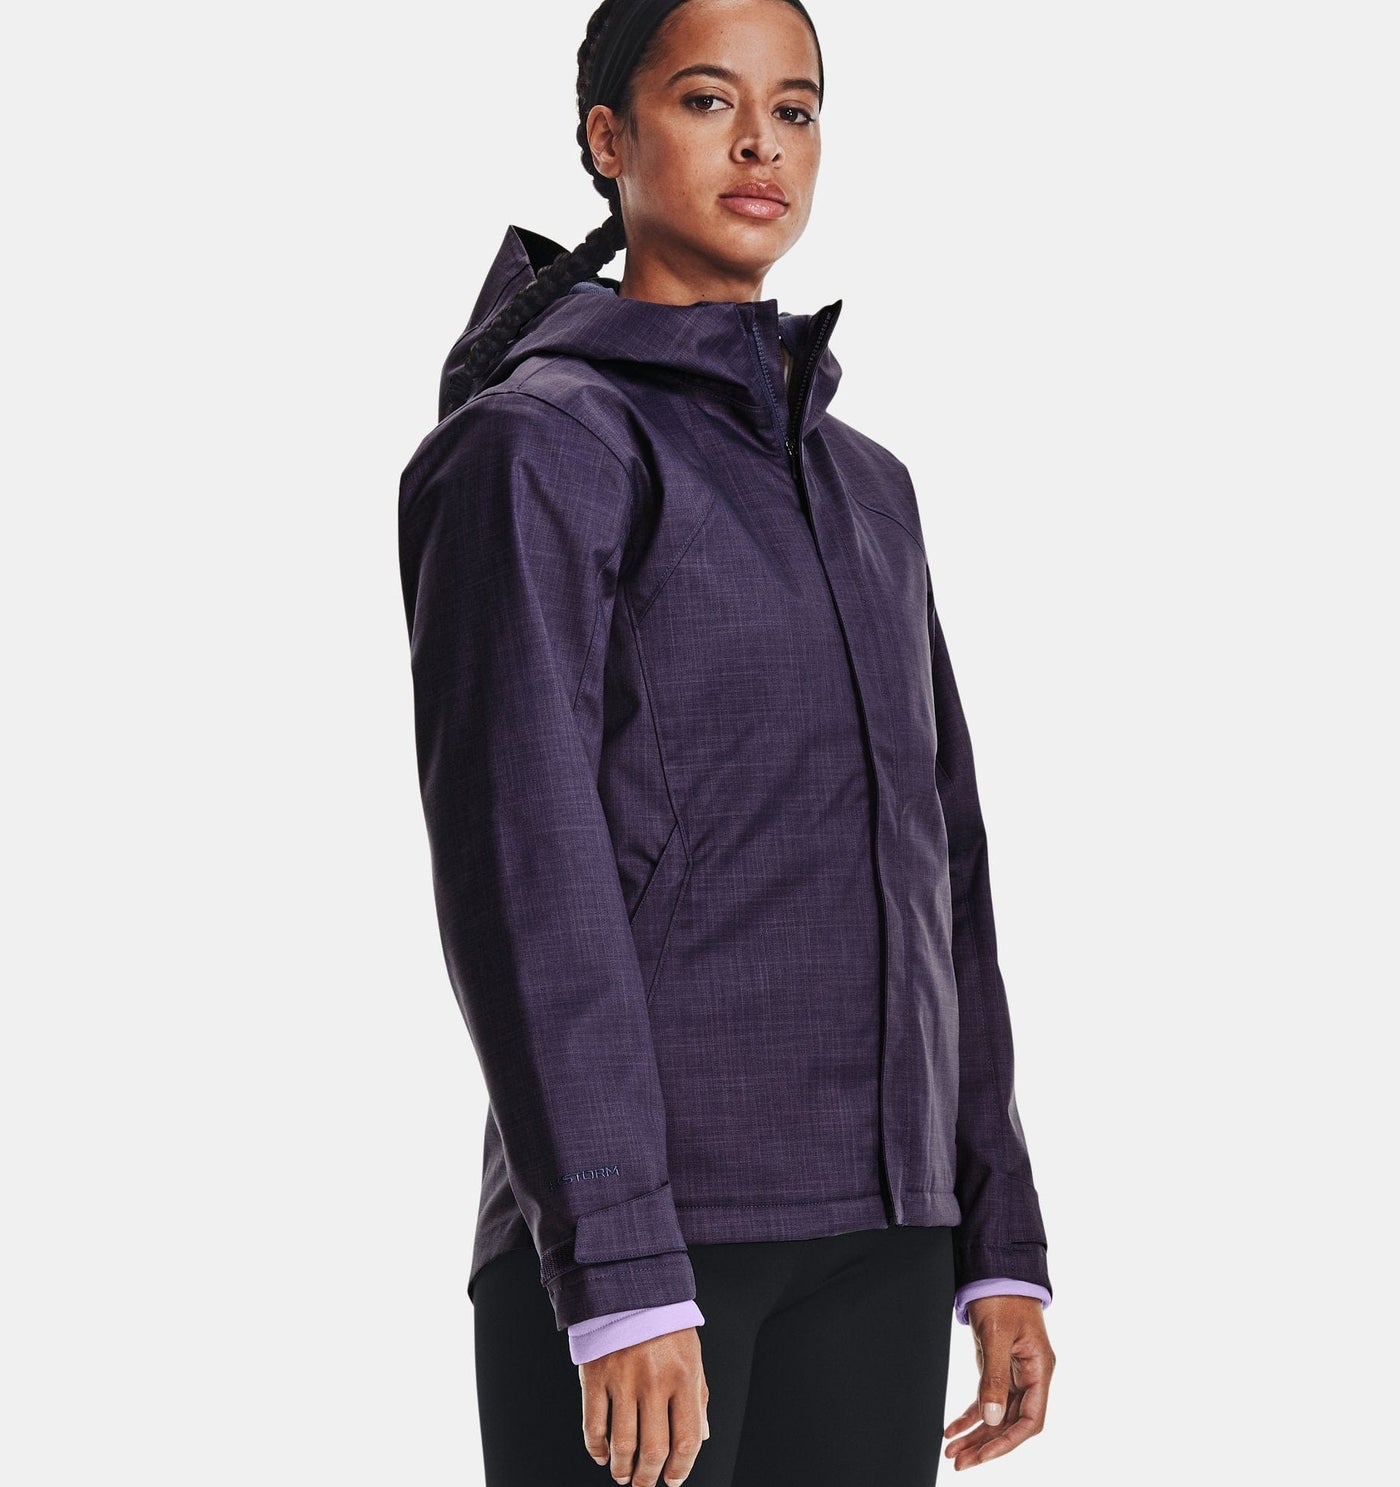 Under Armour Women's Under Armour Storm Sienna 3-in-1 Jacket Purple Small